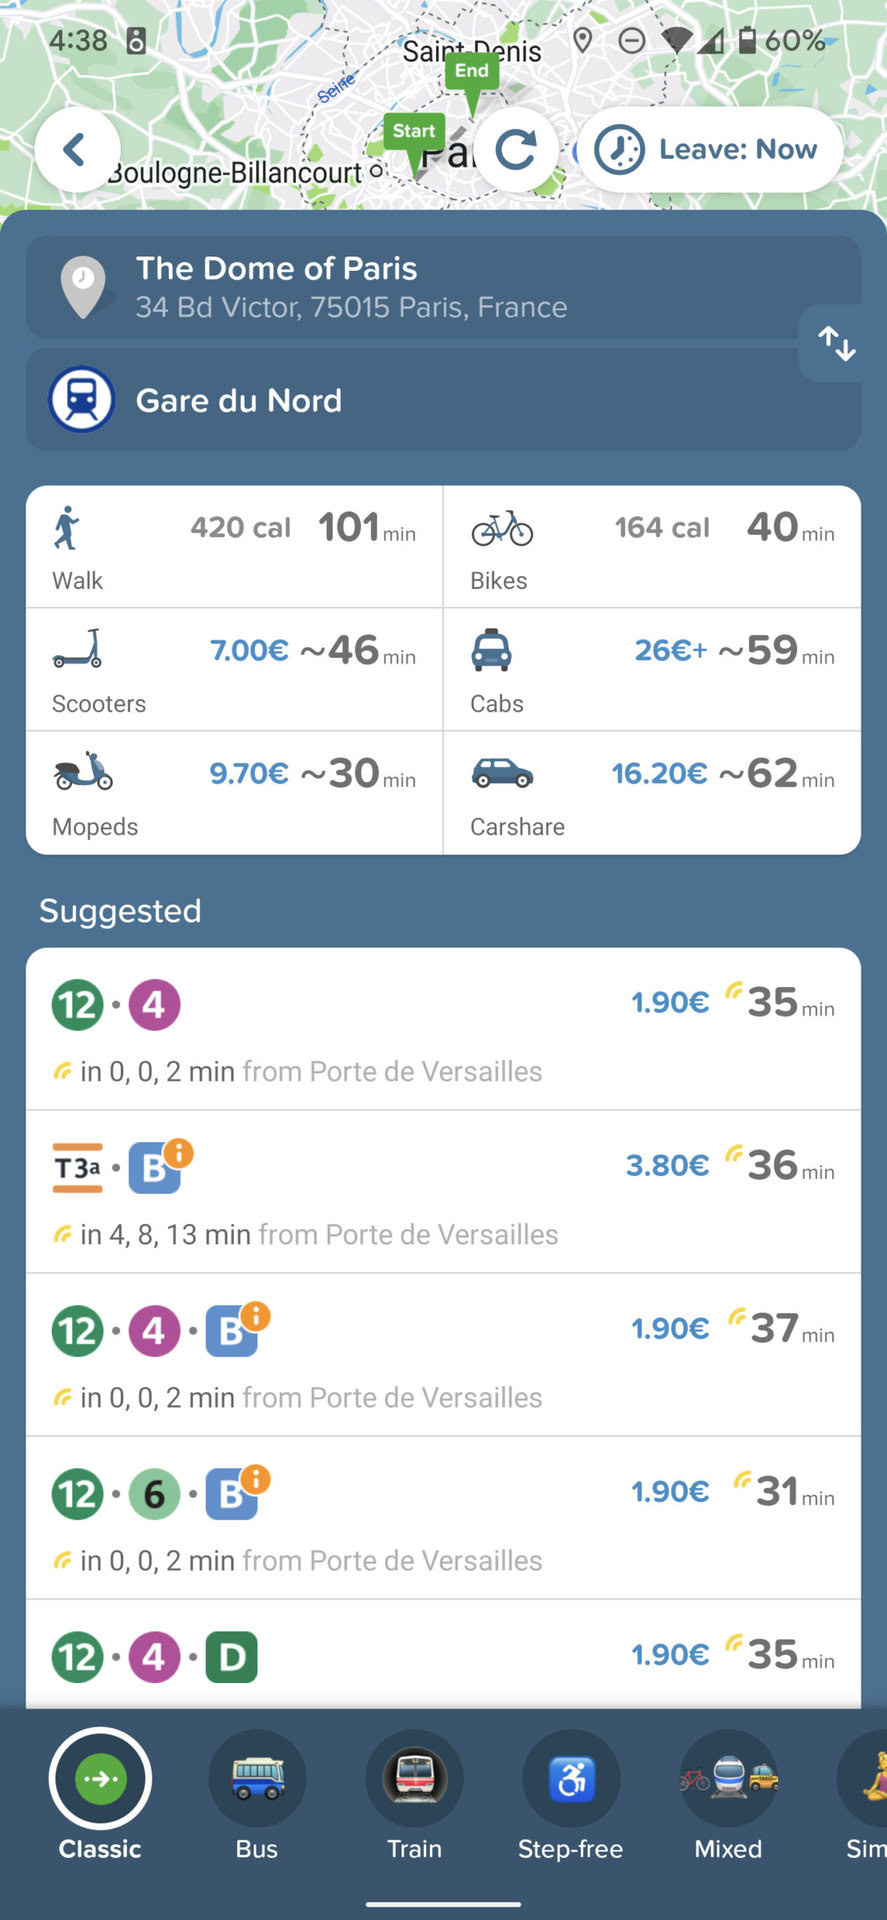 citymapper transit app showing transport options and times